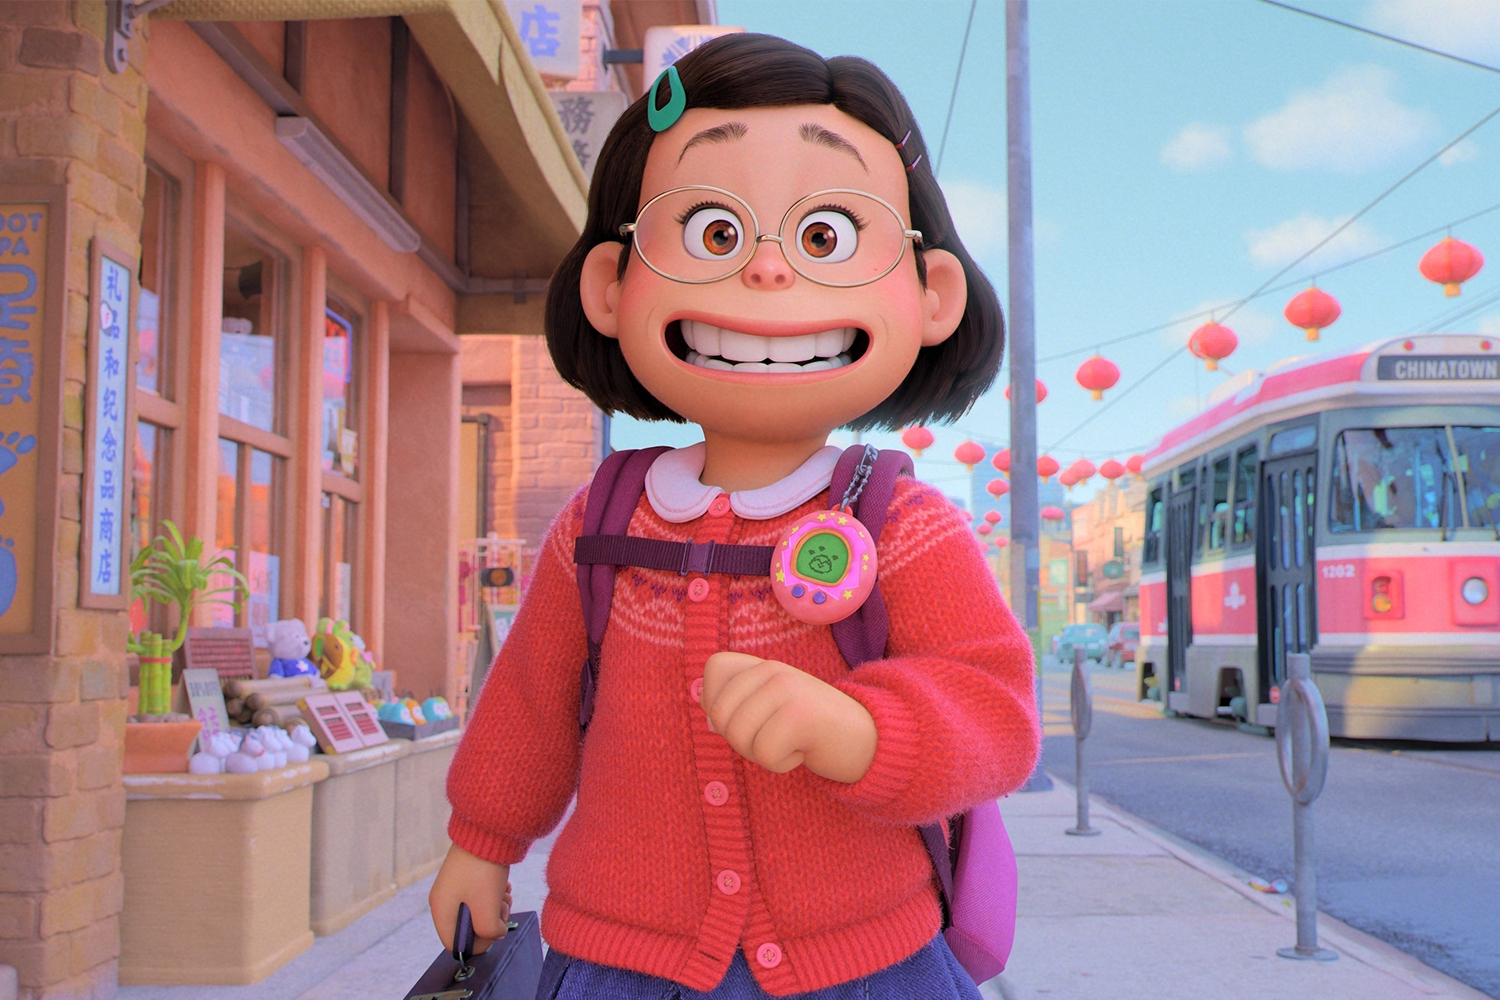 Meilin (voiced by Rosalie Chiang) in Pixar's "Turning Red." A review of the movie from CinemaBlend has been removed from the entertainment website after it was called racist and sexist.